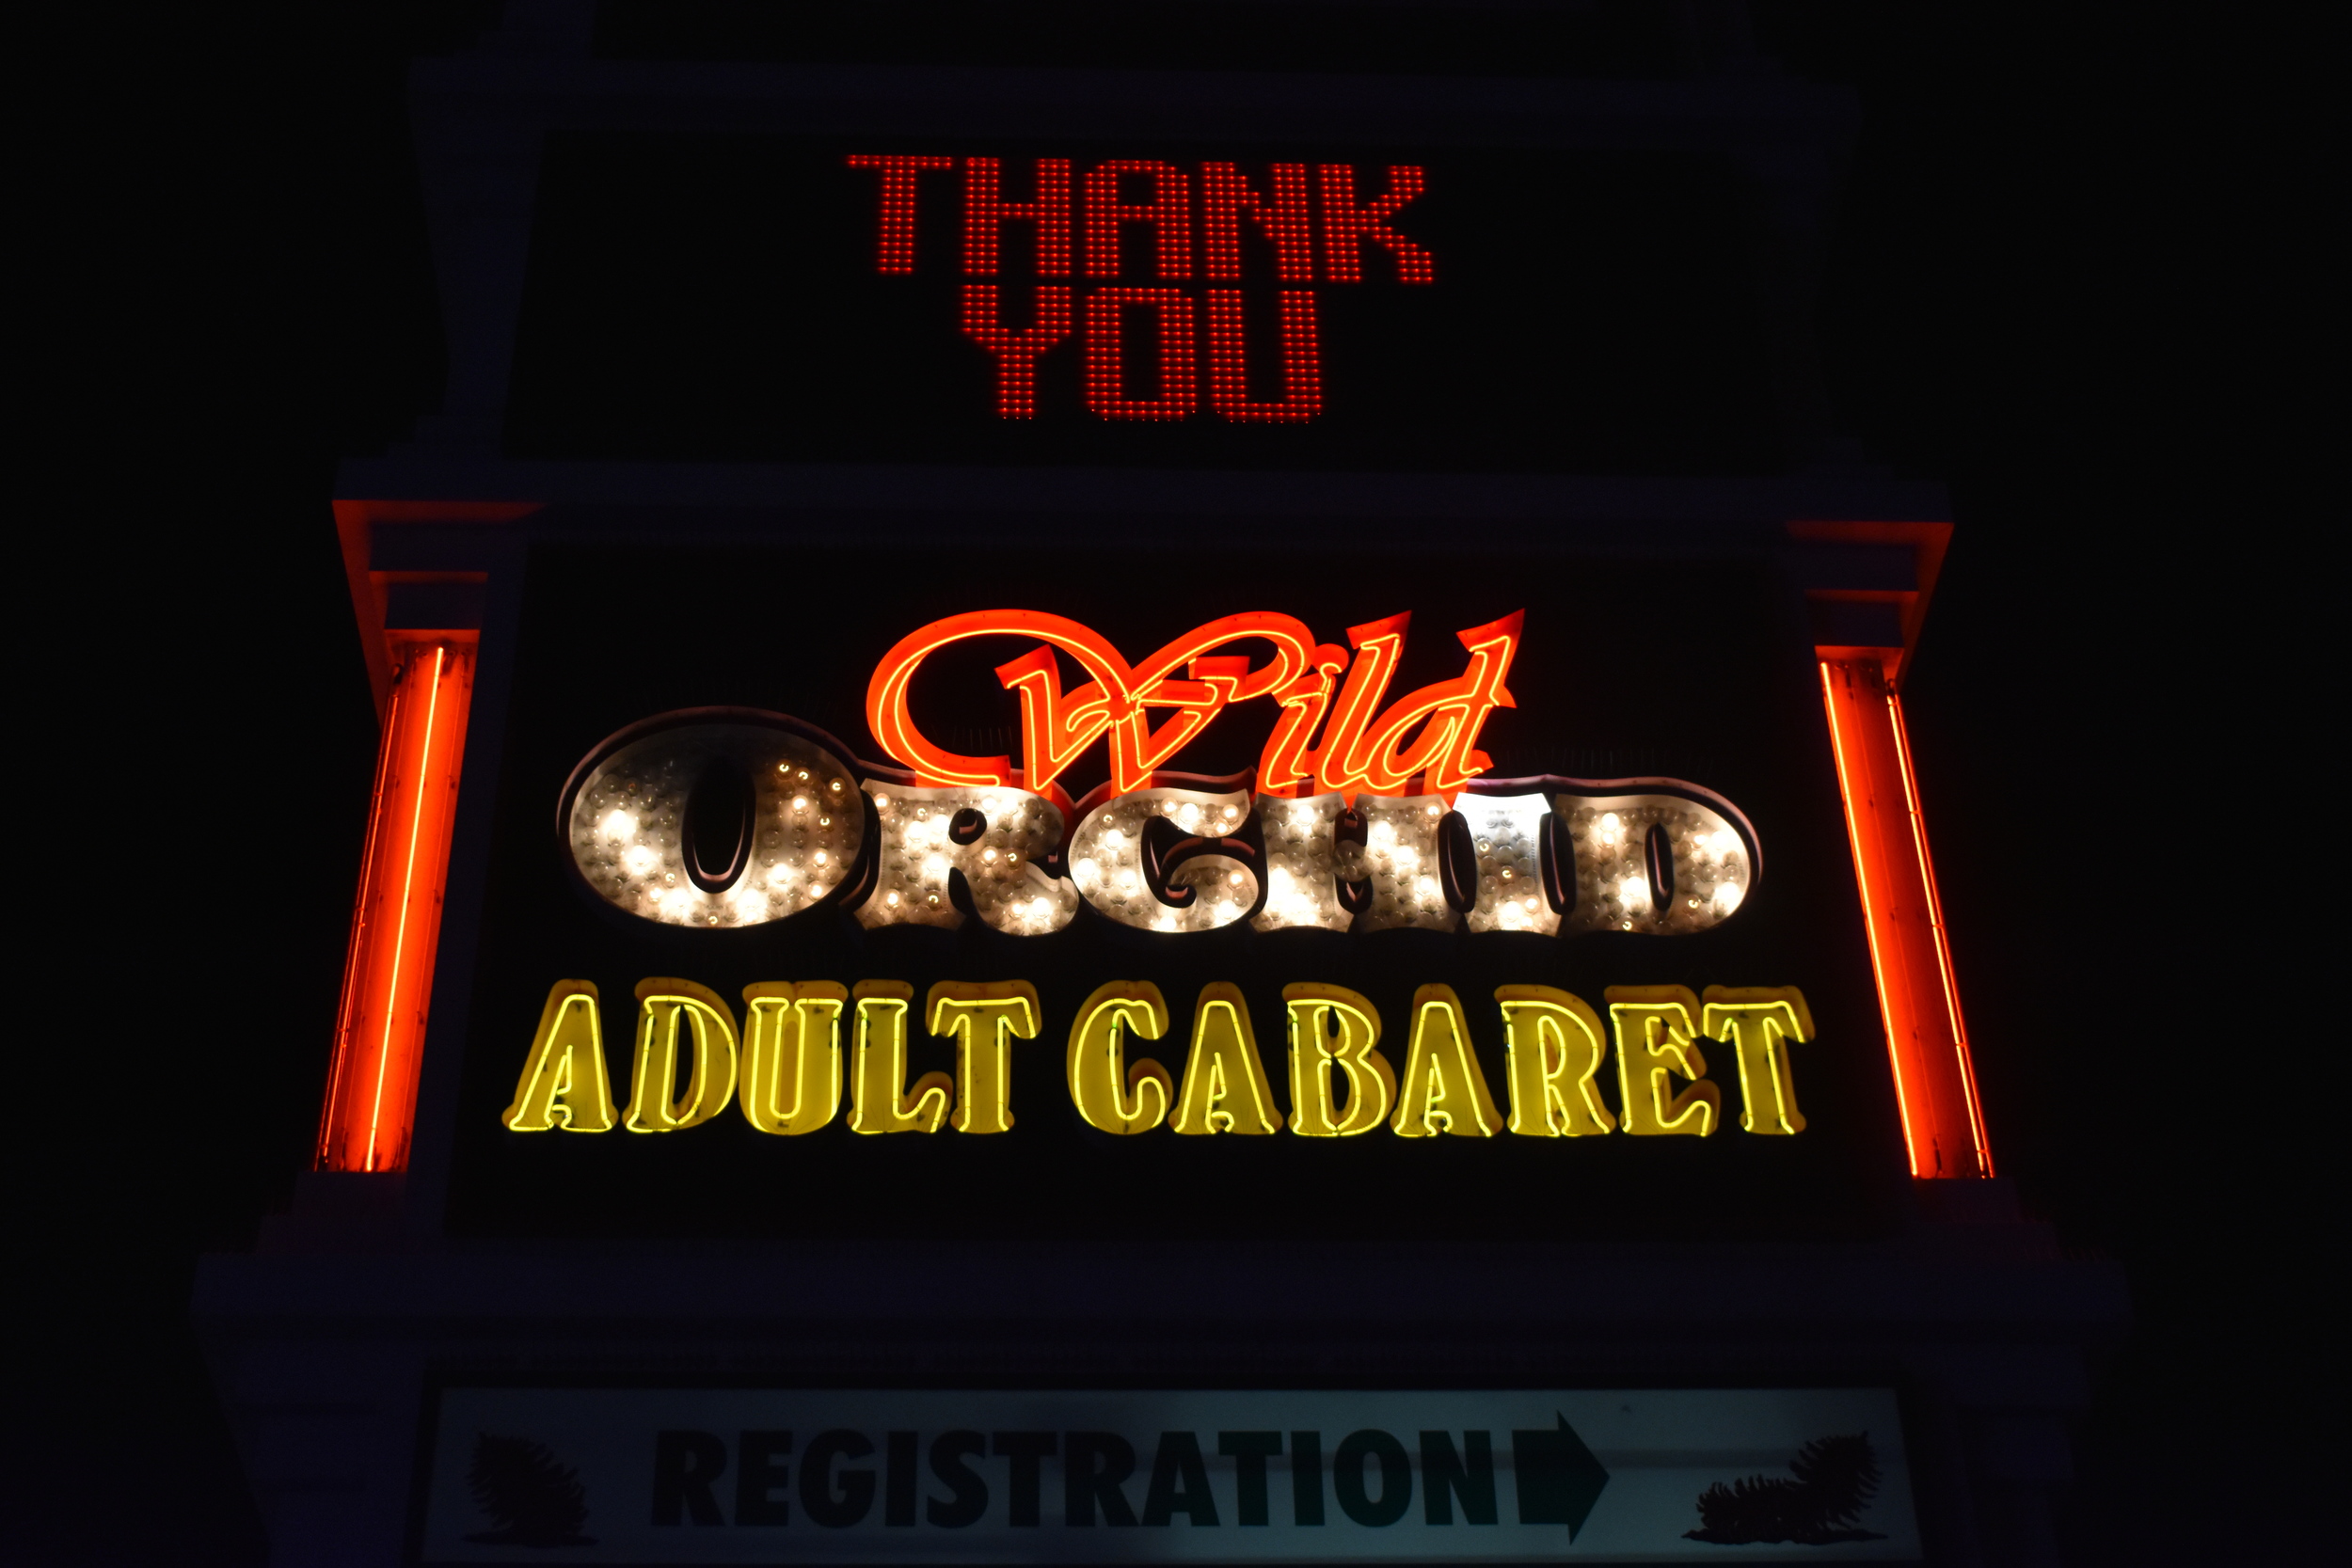 Wild Orchid Adult Cabaret double mounted sign, Reno, Nevada